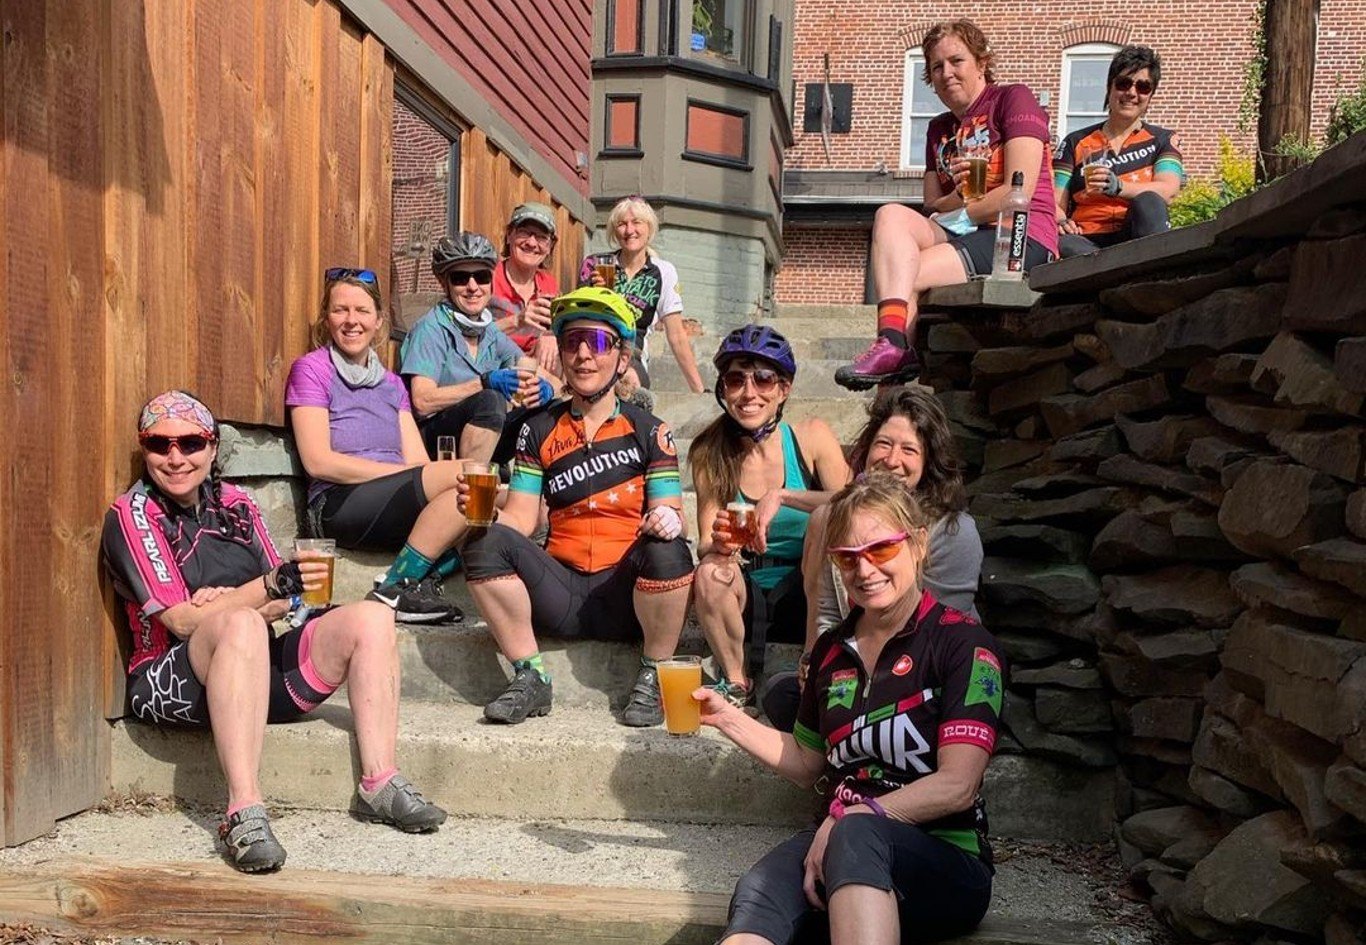 Bicyclists relax with beers after a bike ride in Ulster County, New York.